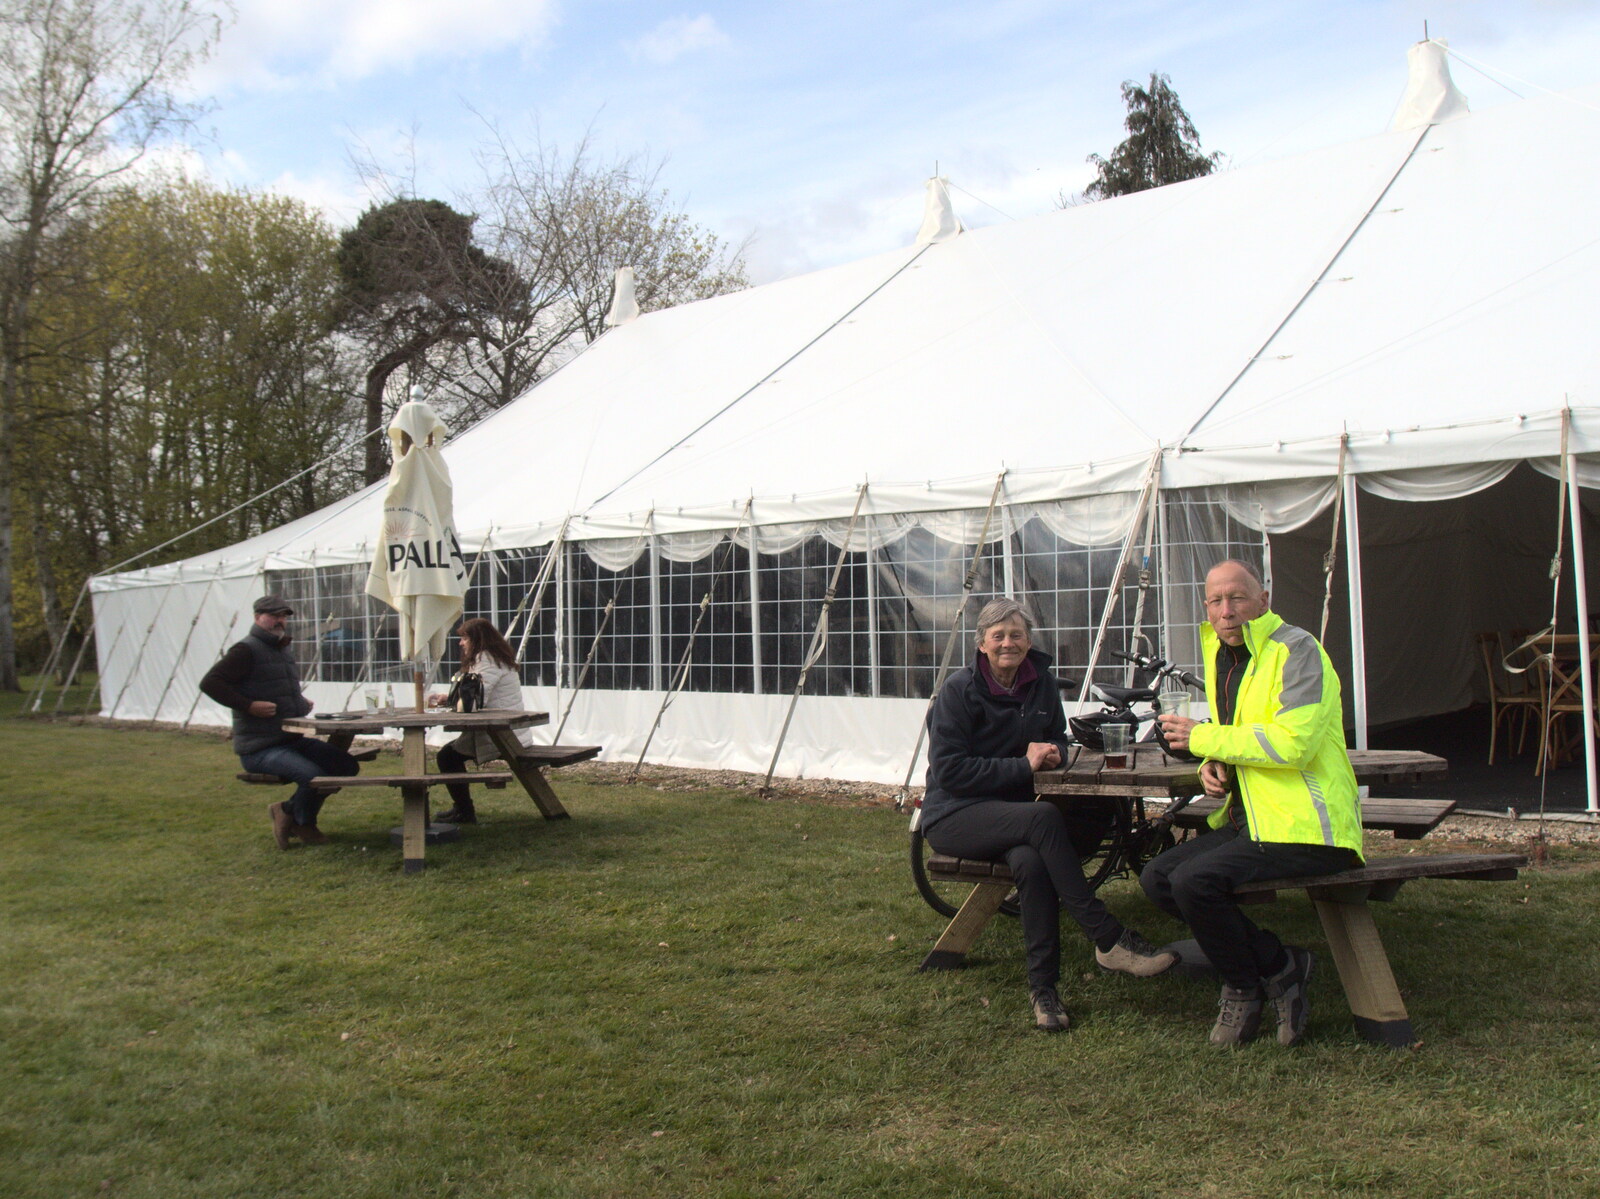 Pippa and Apple are on the adjacent table from BSCC Beer Garden Hypothermia, Hoxne and Brome, Suffolk - 22nd April 2021